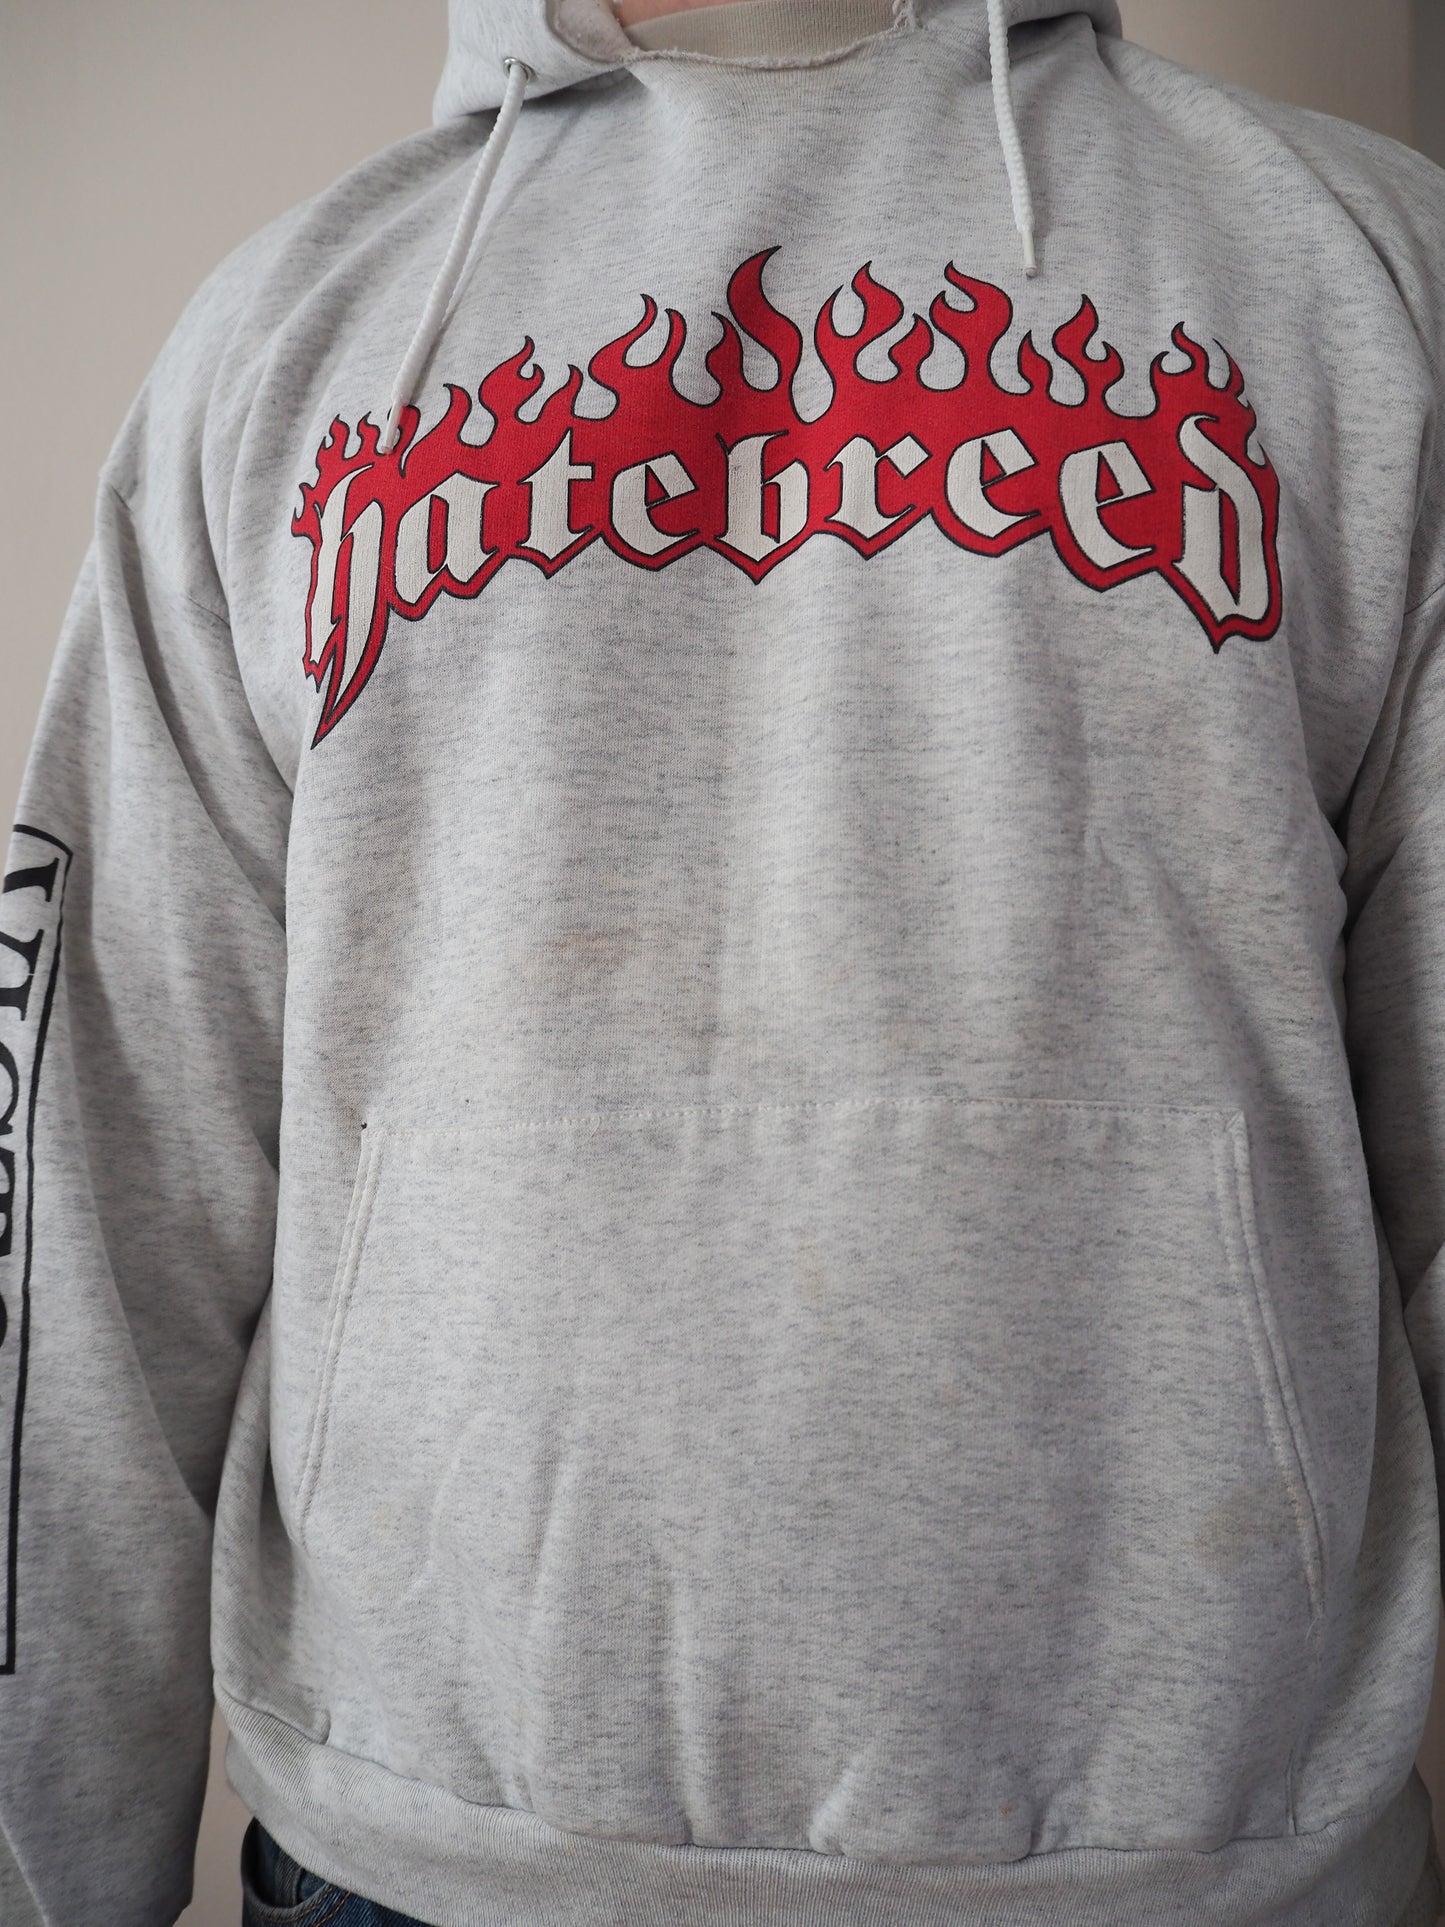 1997 Hatebreed "What I have in My Heart" Hoodie